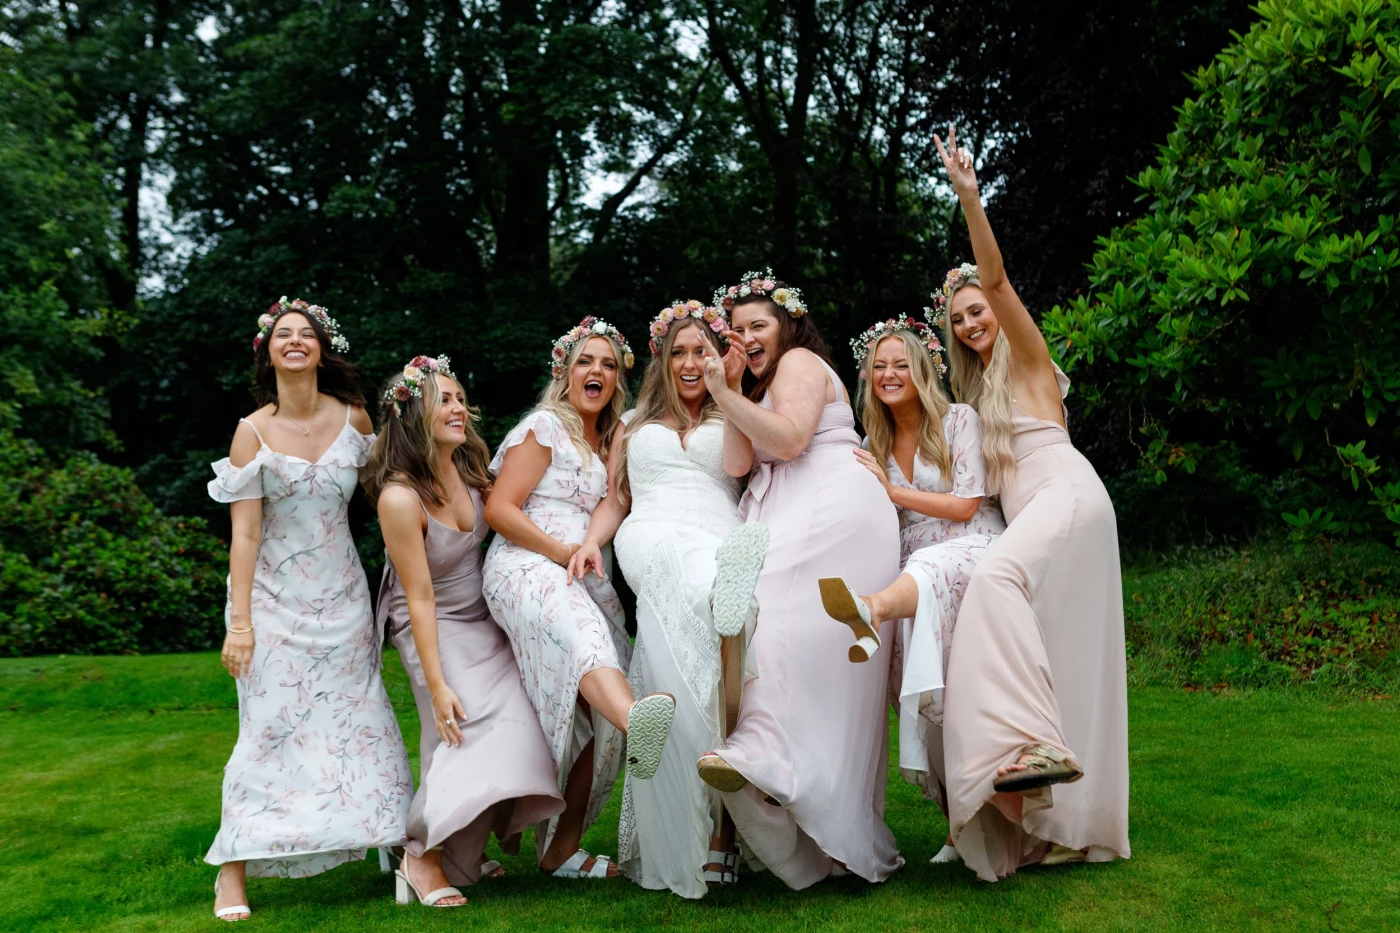 Another image from the Lake District wedding in July 2023.

The bride and her bridesmaids were suc...